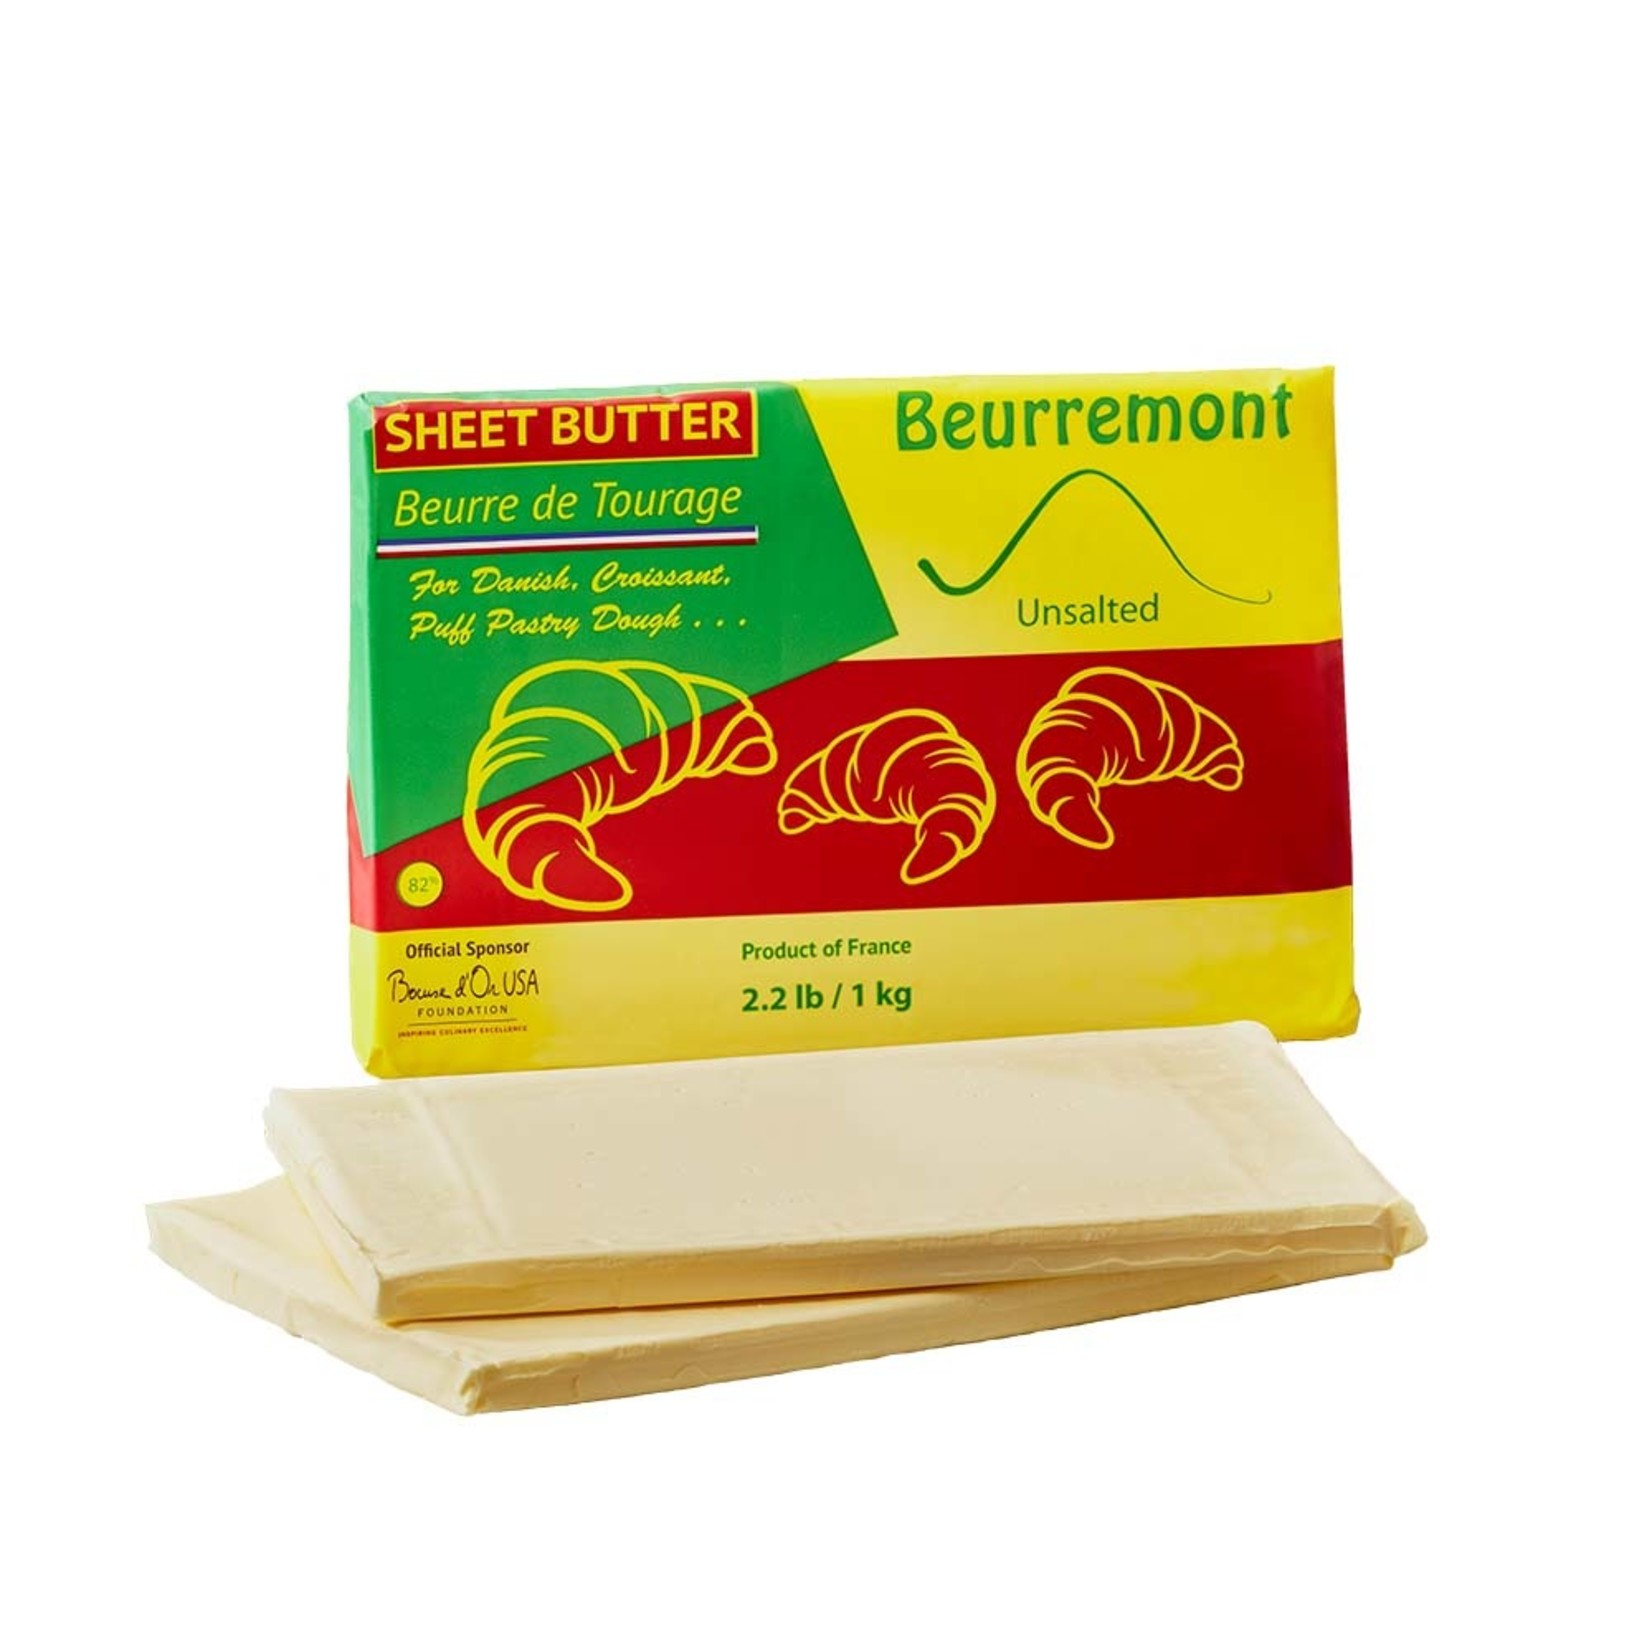 Beurremont - 82% Tourage Butter in Sheets - 2.2lb, BUE275-S